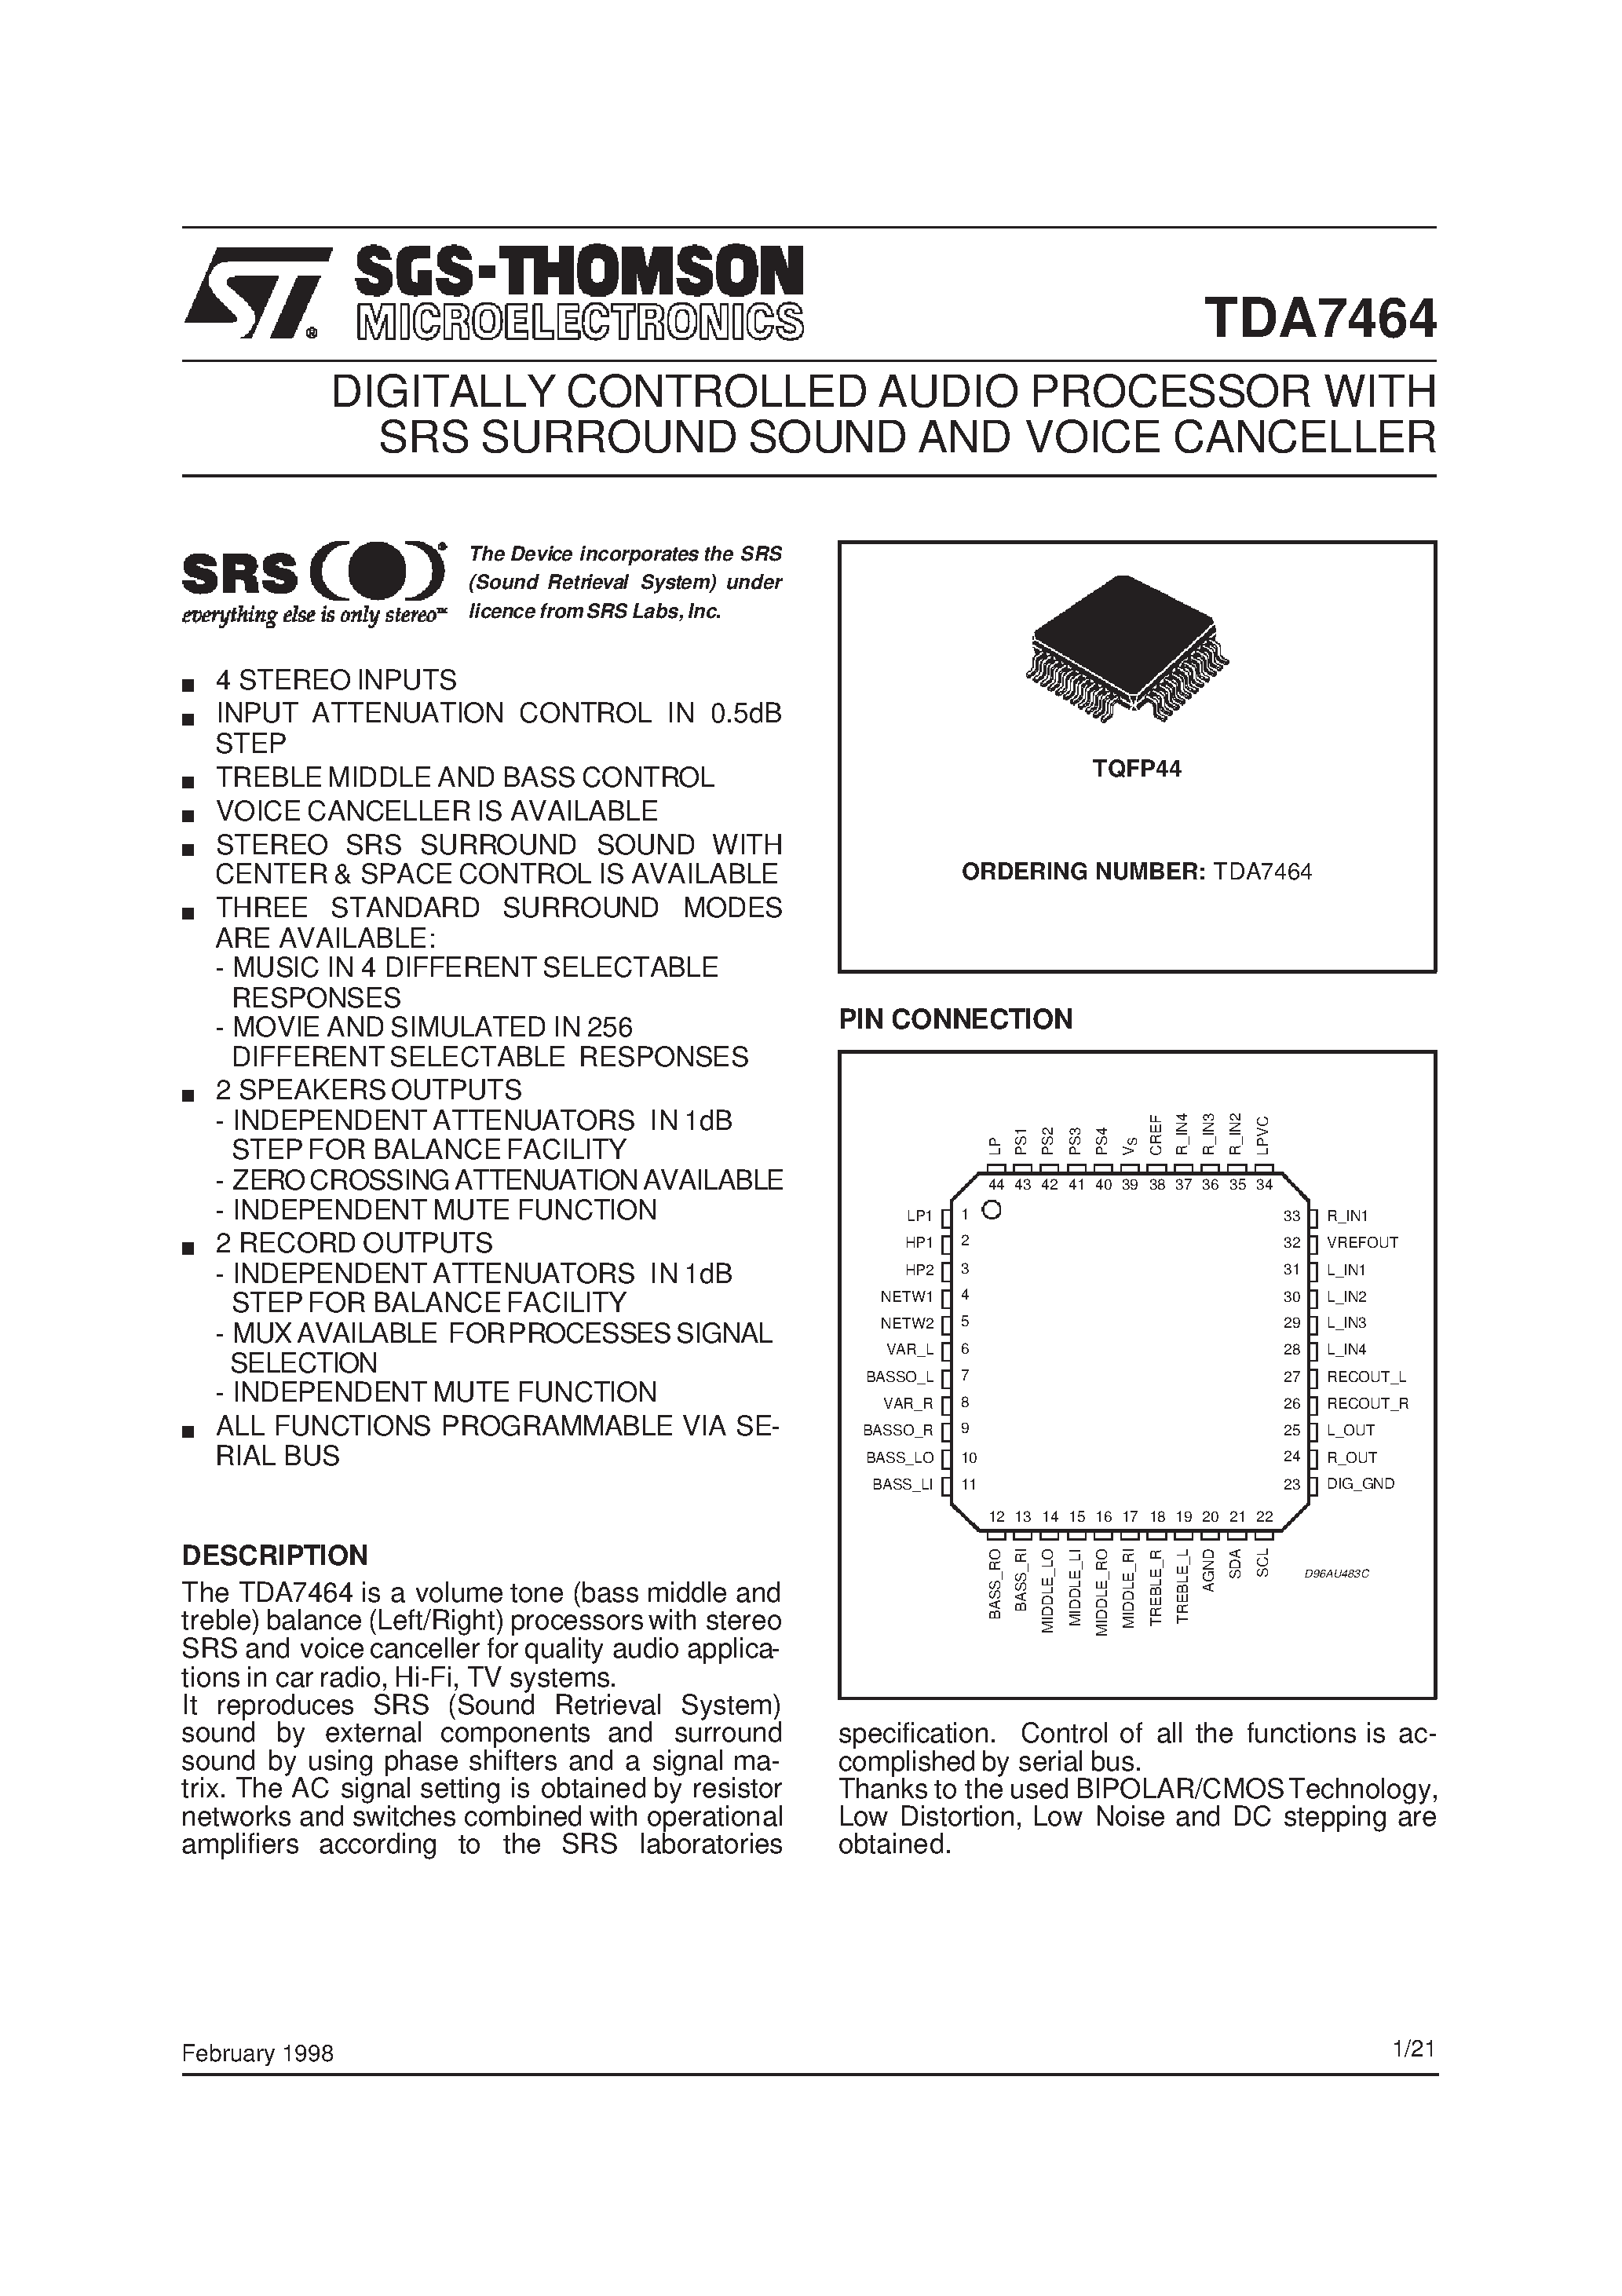 Datasheet 7464 - DIGITALLY CONTROLLED AUDIO PROCESSOR WITH SRS SURROUND SOUND AND VOICE CANCELLER page 1